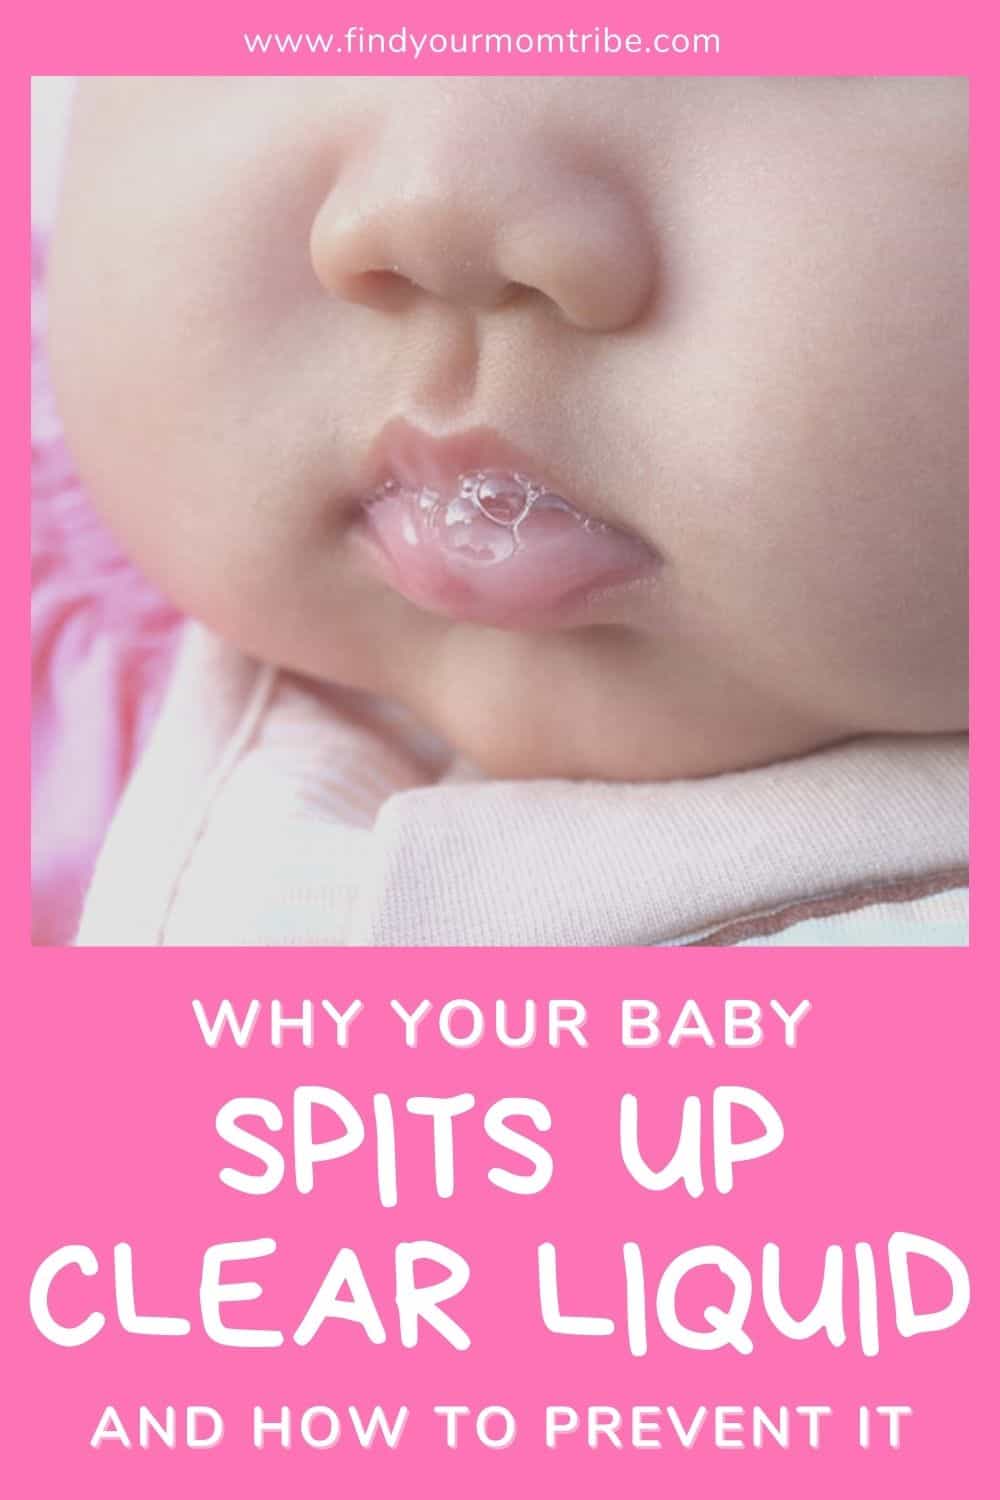 Baby Spits Up Clear Liquid